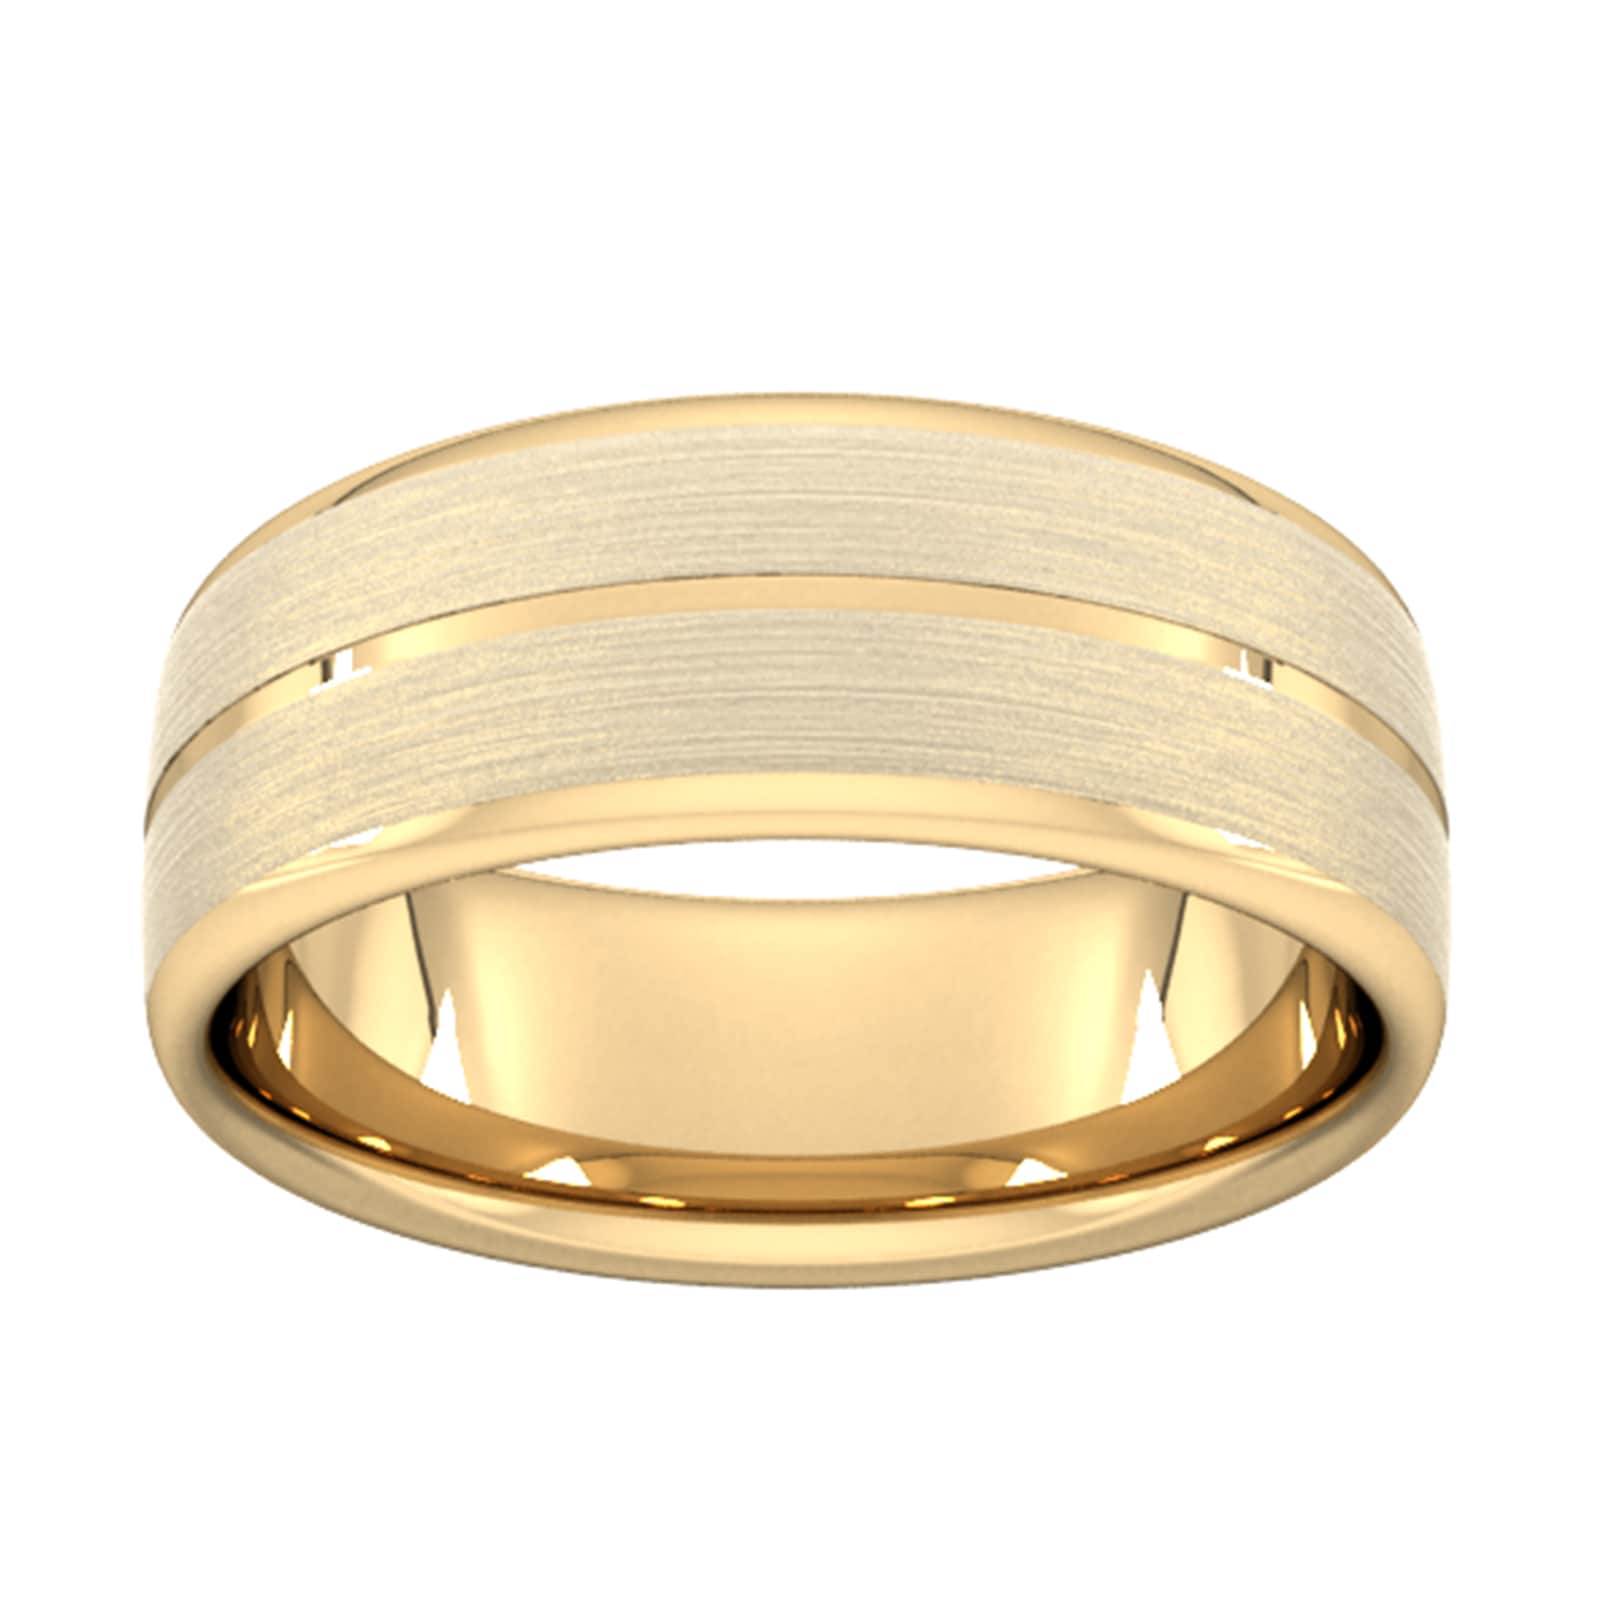 8mm D Shape Standard Centre Groove With Chamfered Edge Wedding Ring In 18 Carat Yellow Gold - Ring Size Y